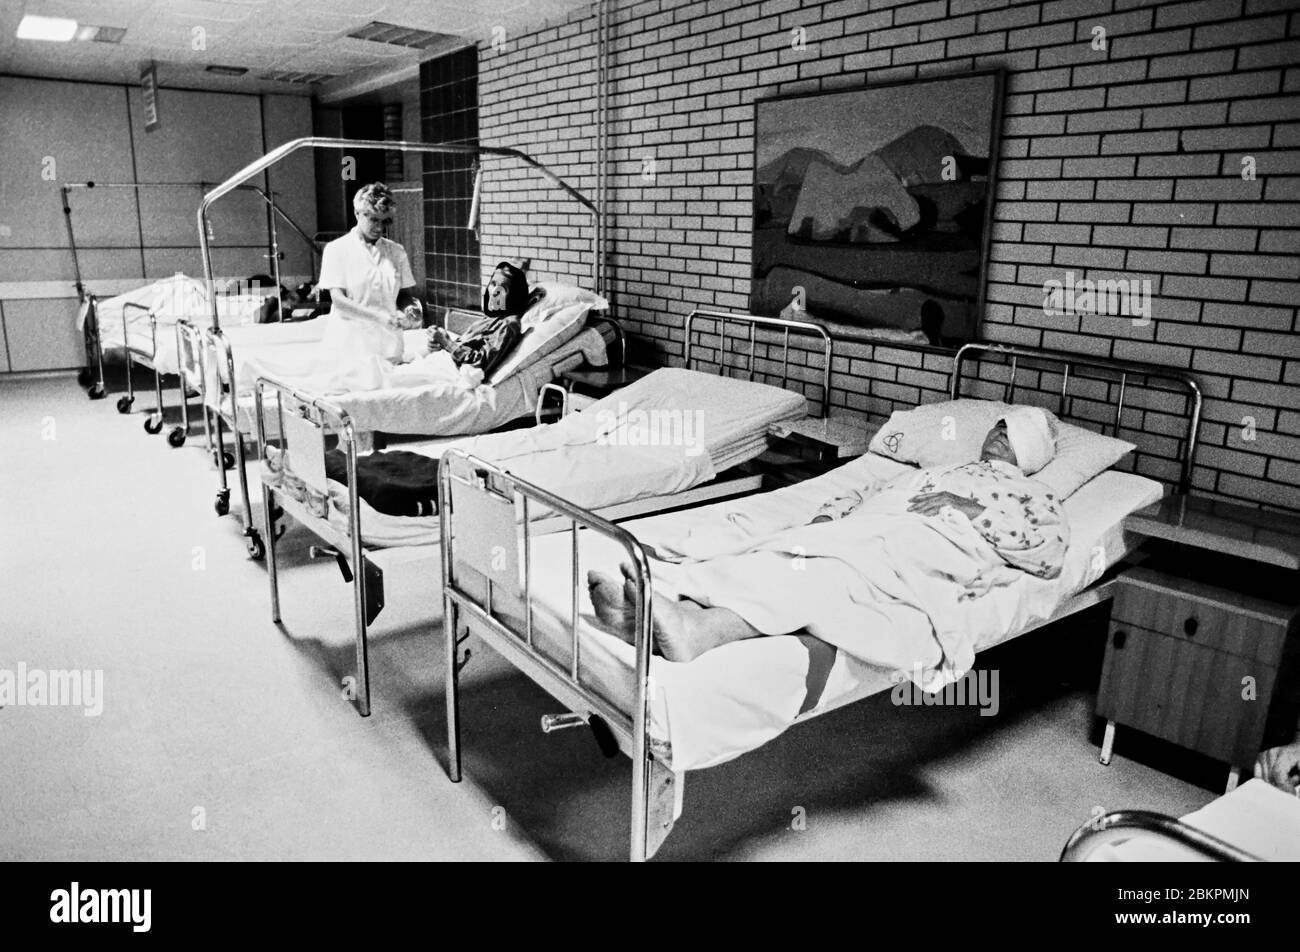 Bosnia 1993 near Mostar during the Balkan War - Refugees in hospital beds wait to see what the future holds Stock Photo